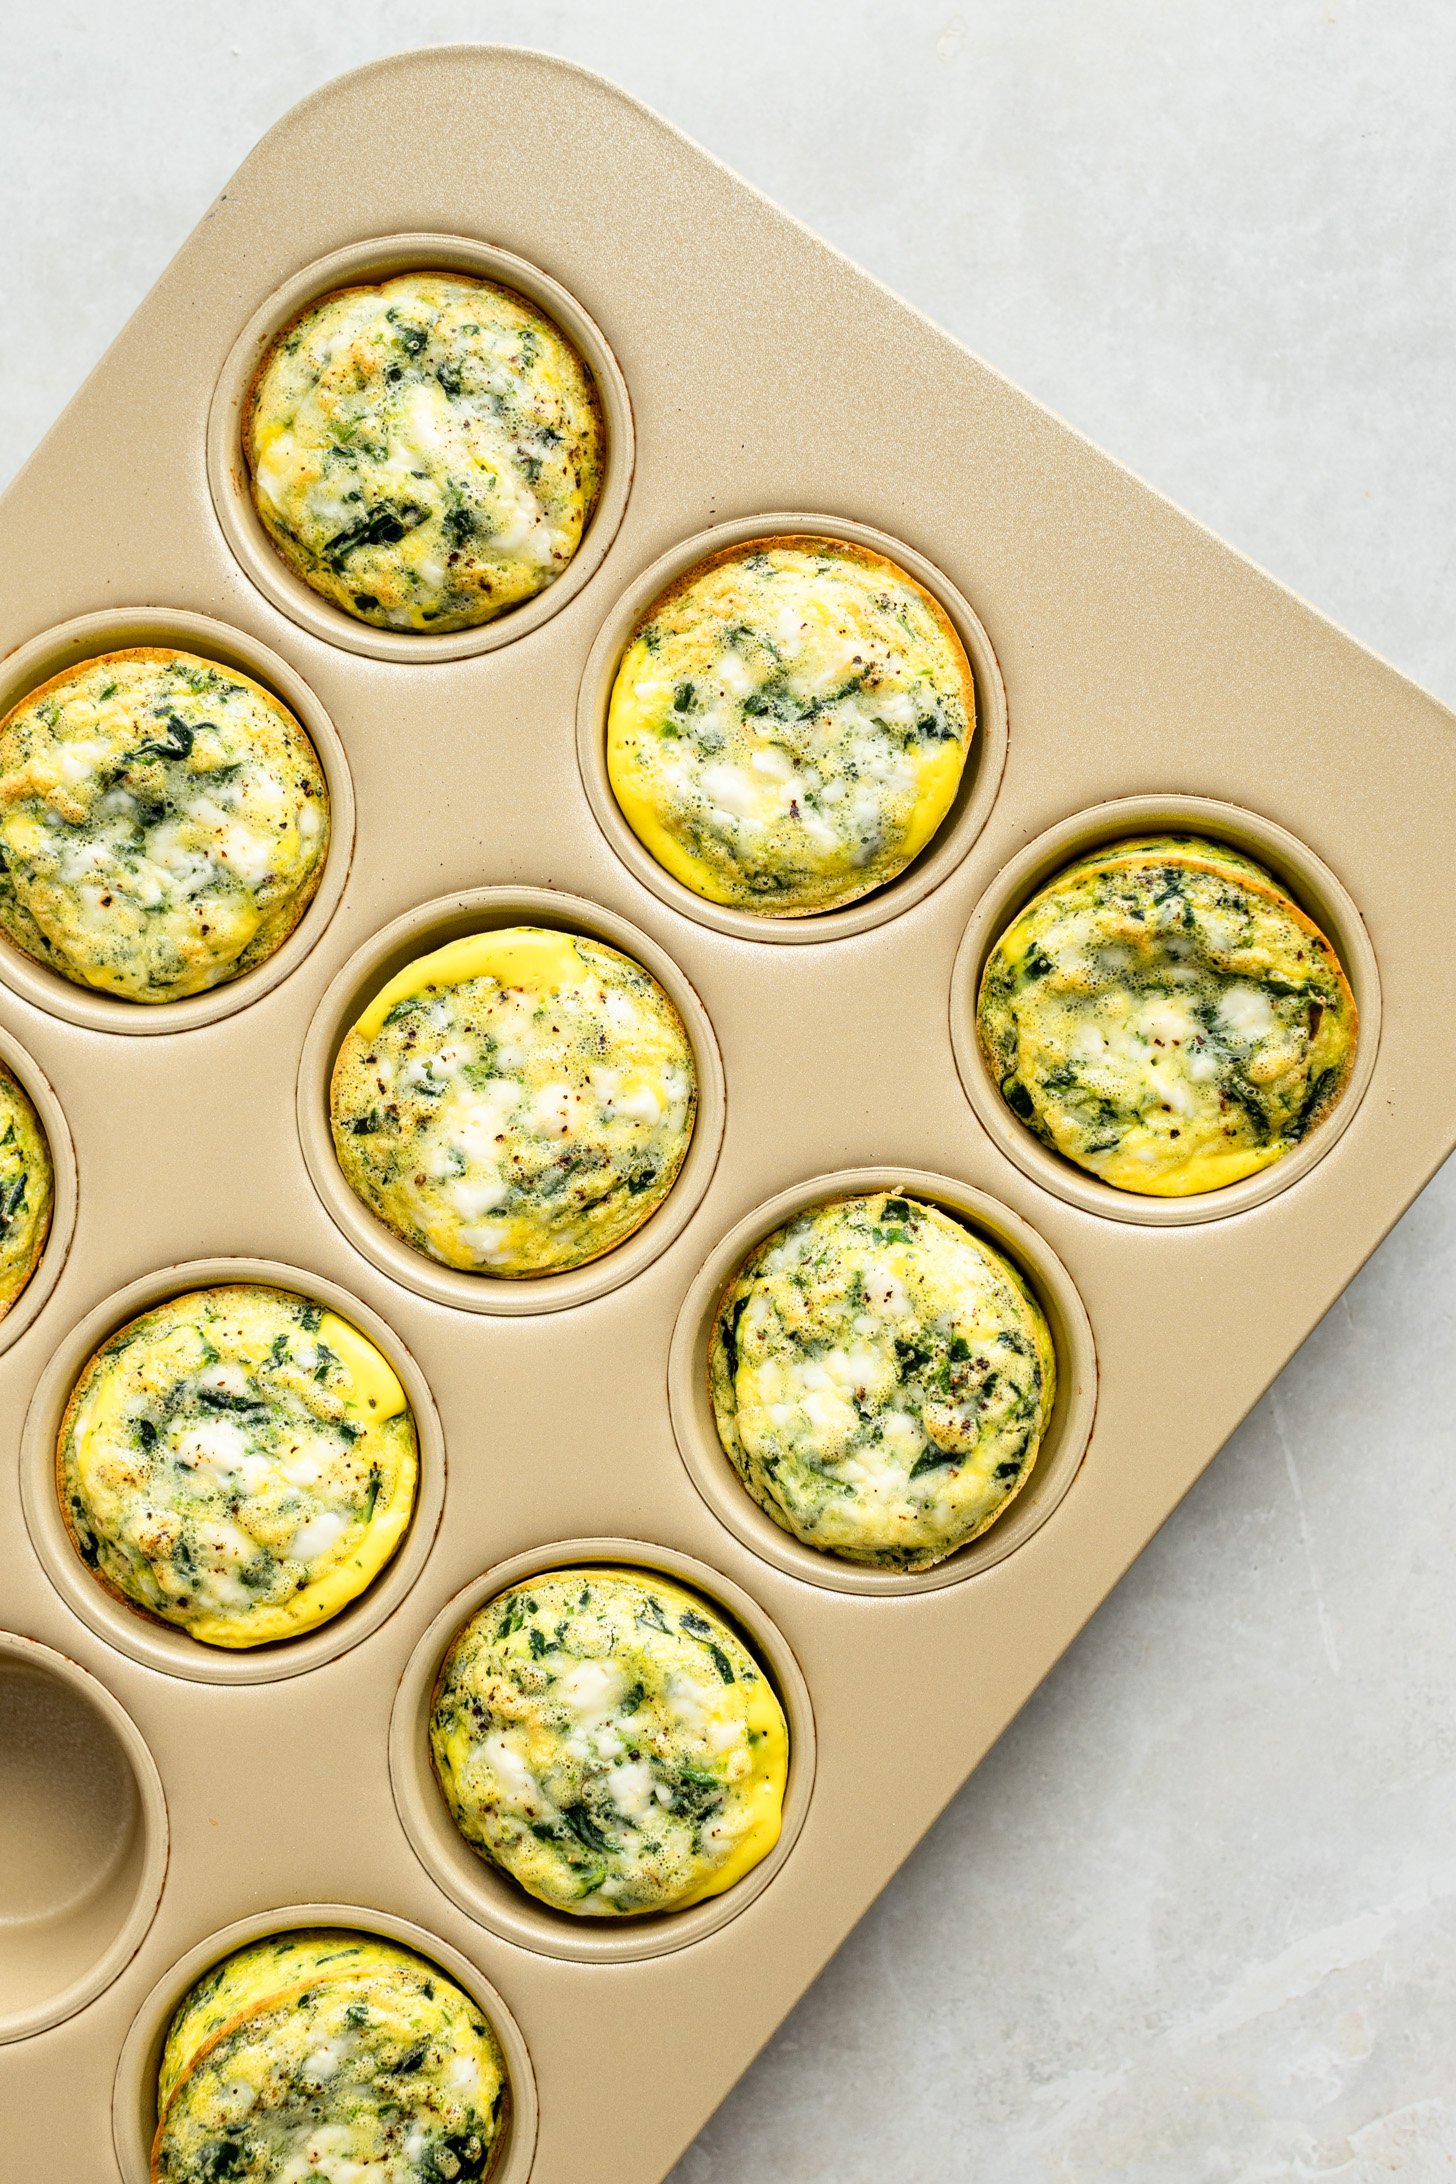 Spinach Feta egg cups in a muffin tin, fresh out of the oven.